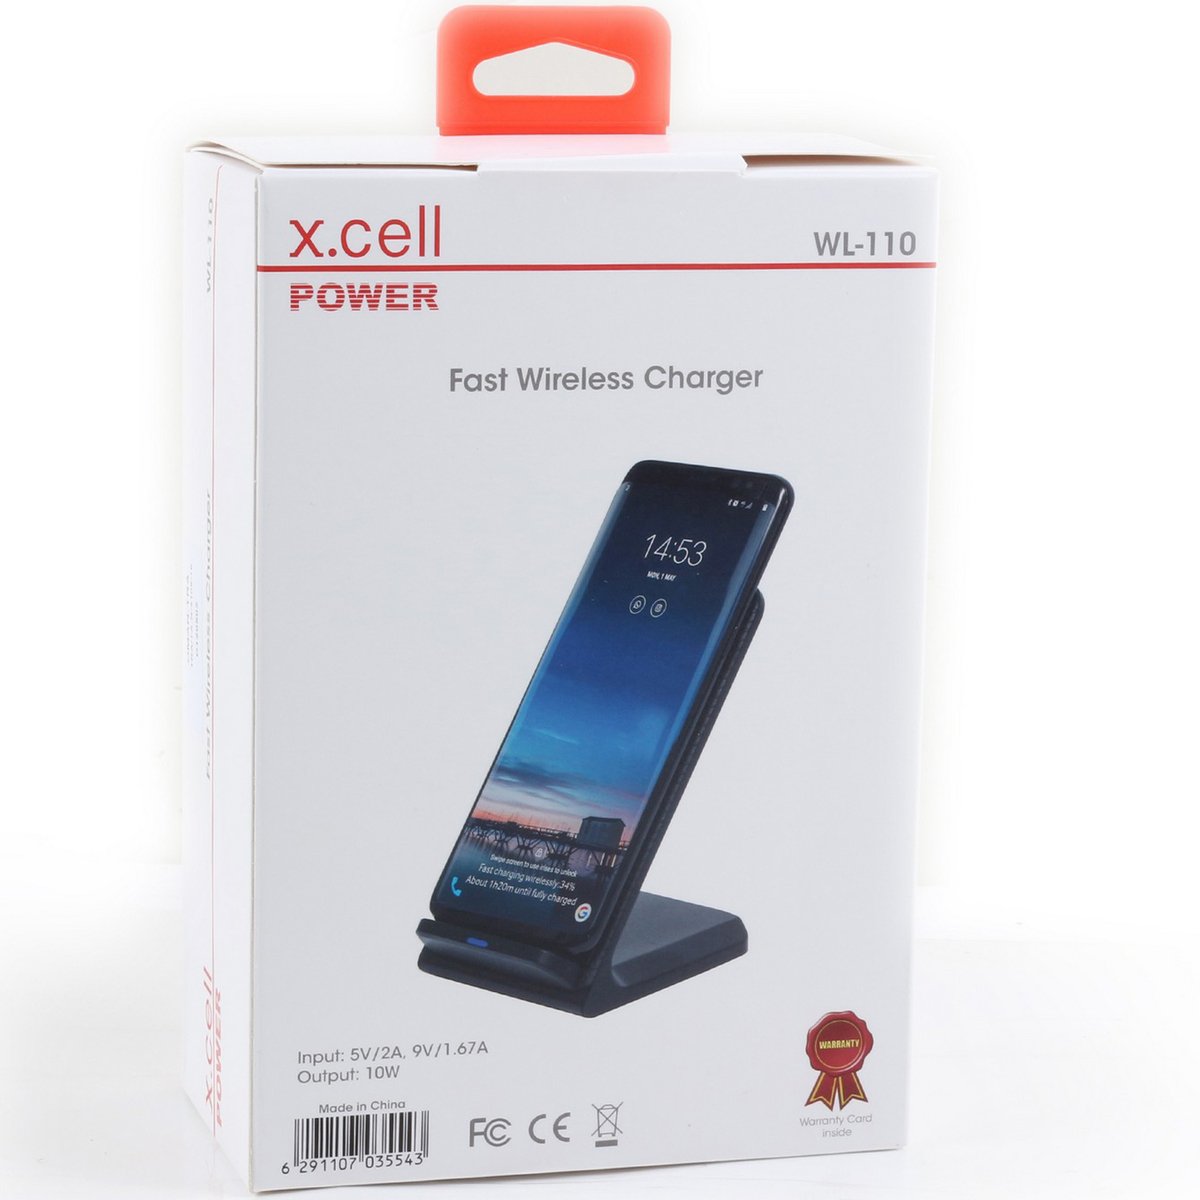 X.Cell Power Fast Wireless Charger WL-110